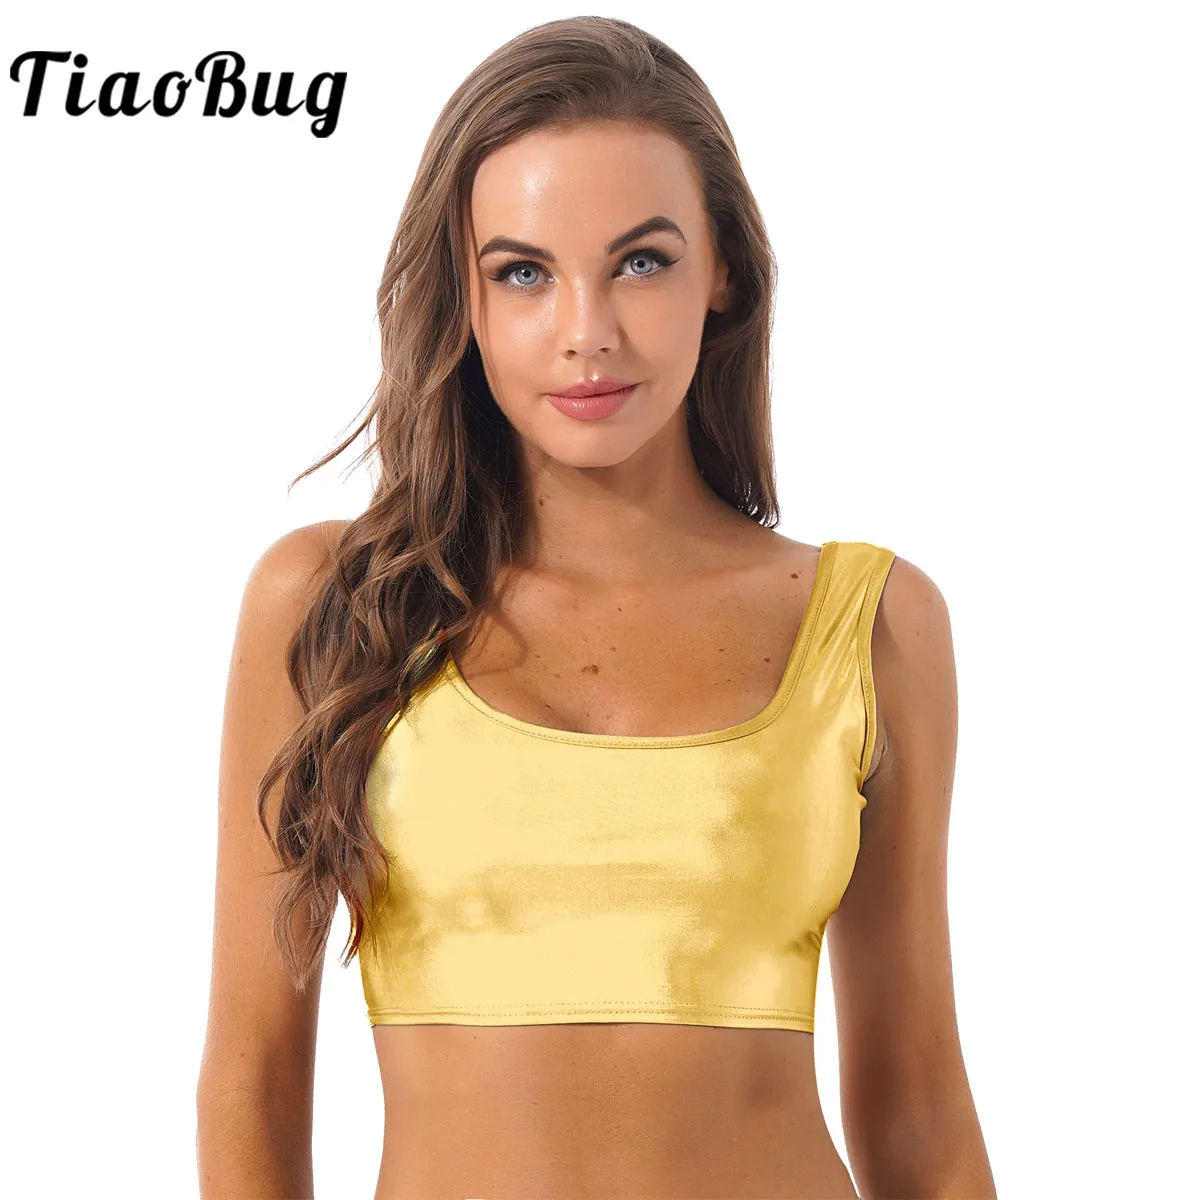 

Women Holographic Bralette Crop Top Sexy Sleeveless Metallic Shiny Tank Vest Top Camis Festival Rave Party Clubwear